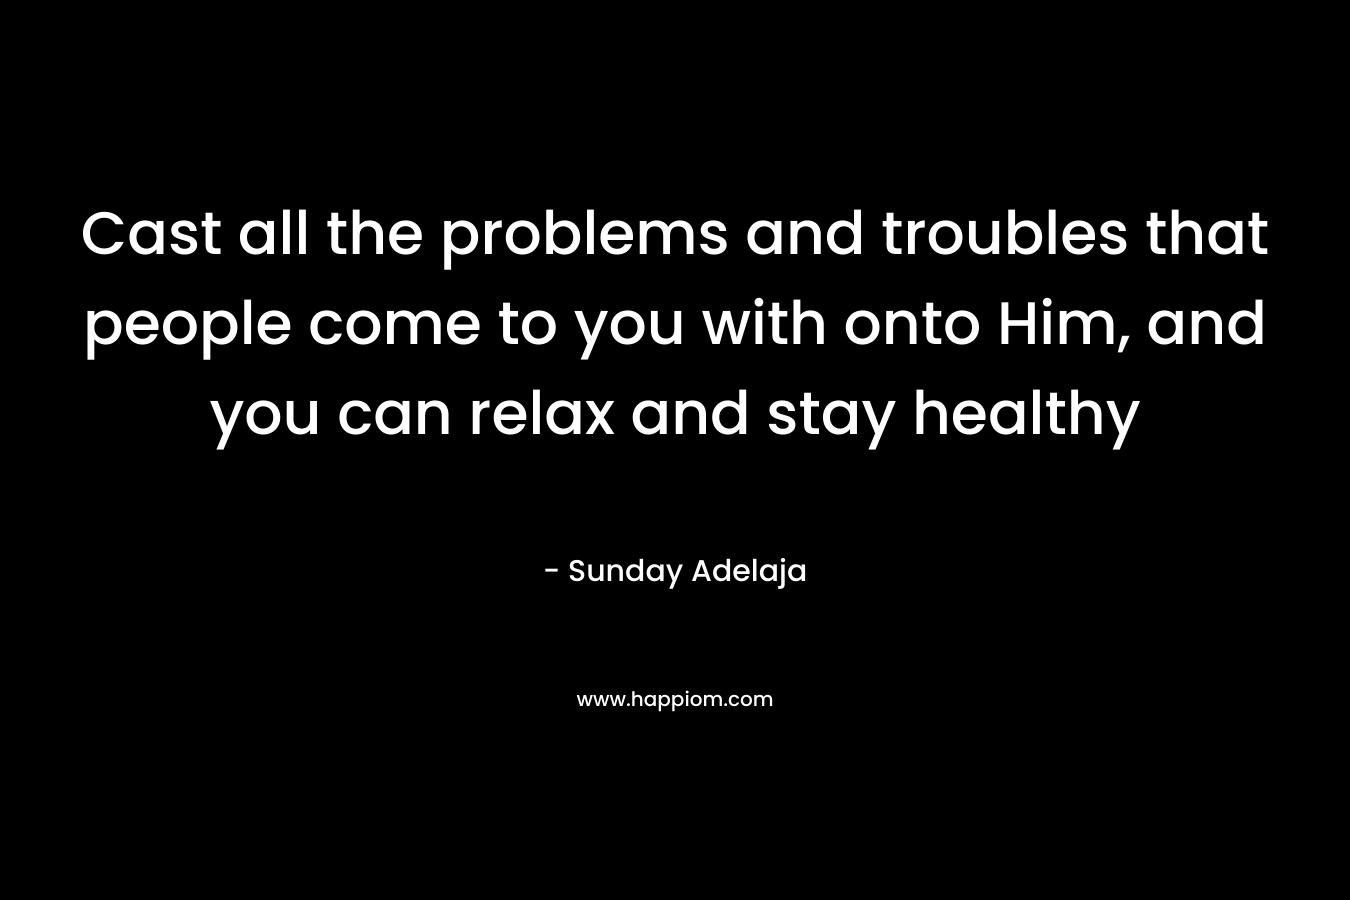 Cast all the problems and troubles that people come to you with onto Him, and you can relax and stay healthy – Sunday Adelaja